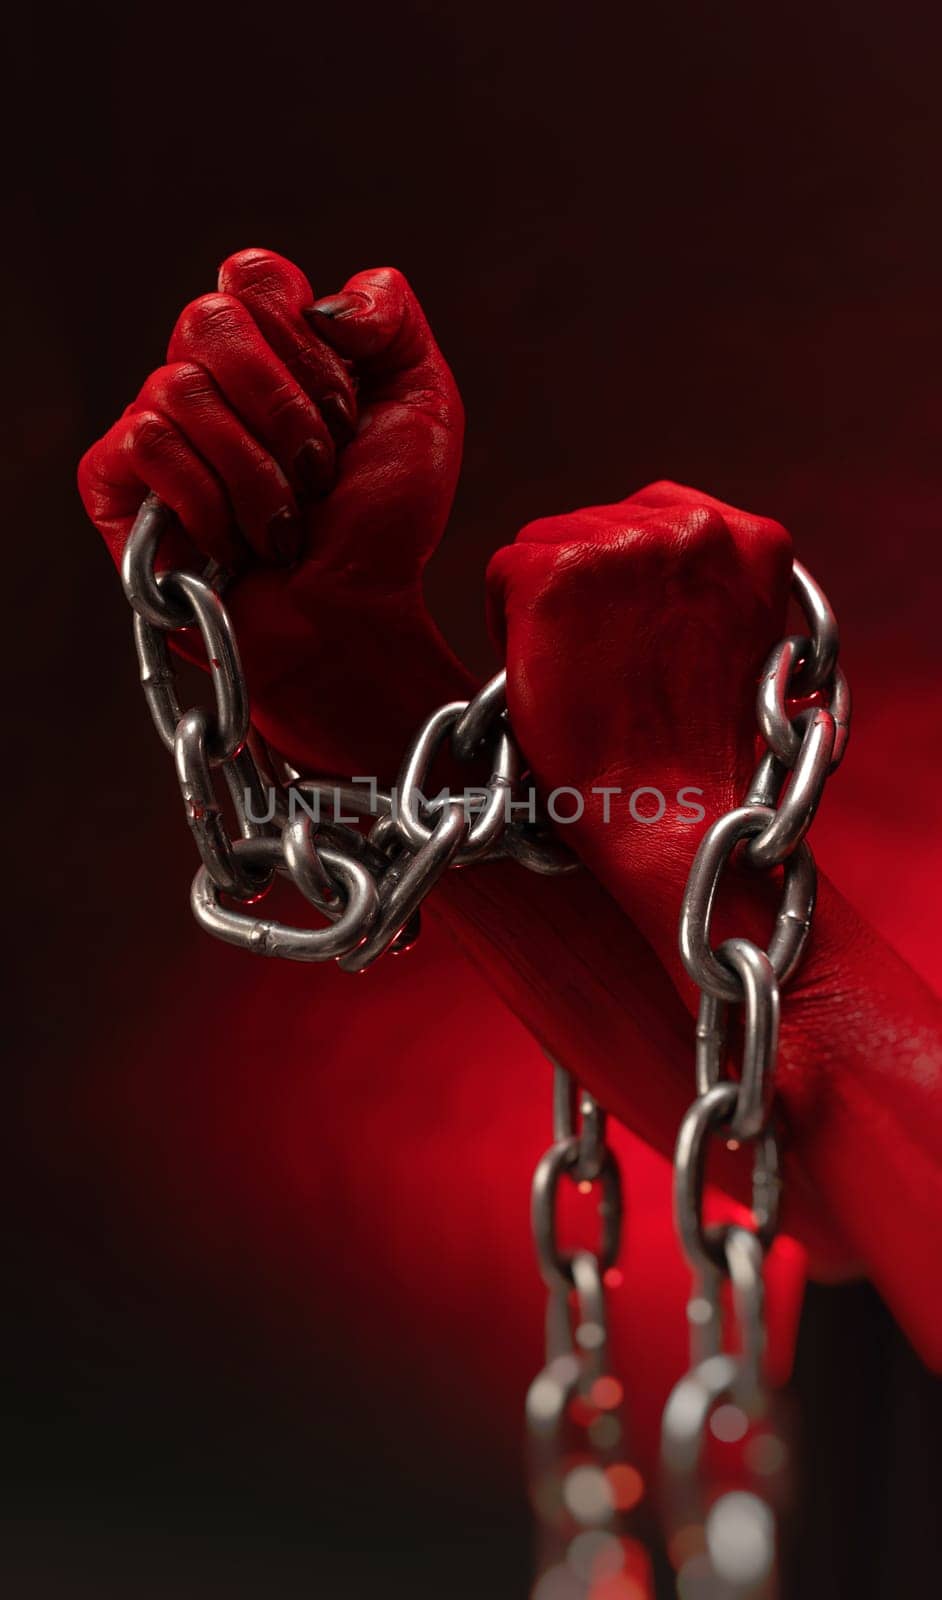 bloodied hands clenched into fists in the shackles of a metal chain symbolize slavery, protest and the struggle for freedom by Rotozey